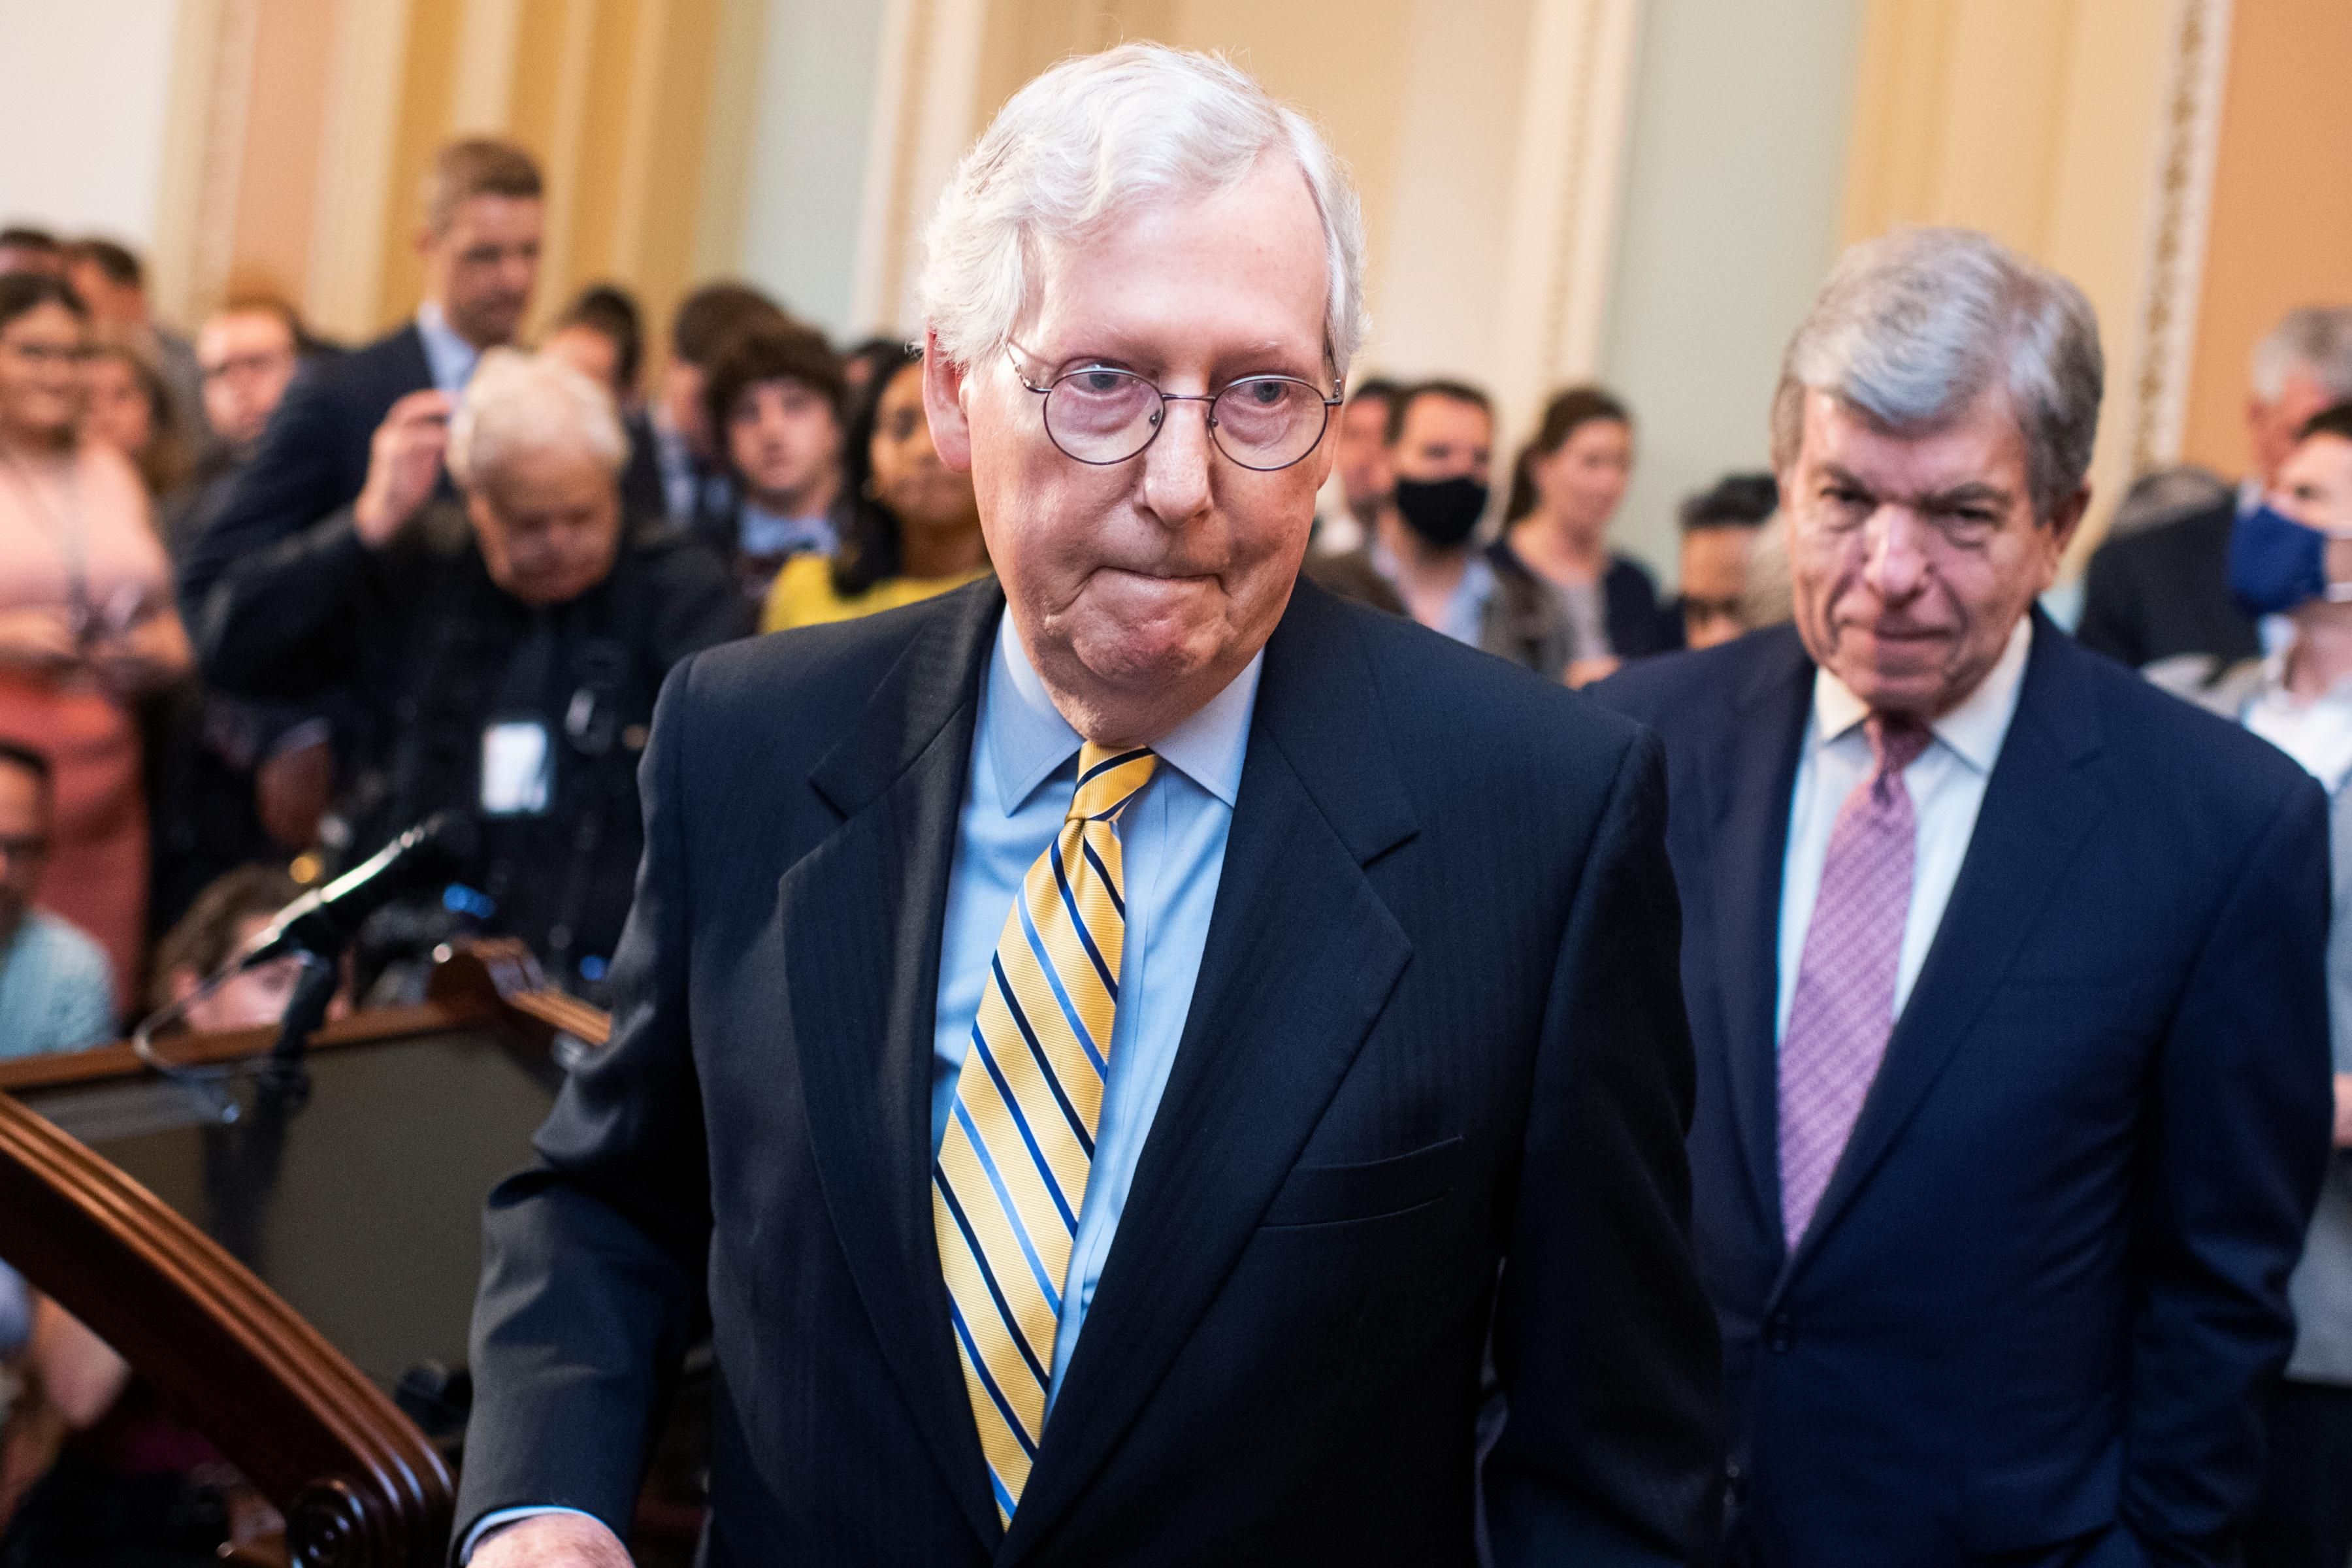 Senate Minority Leader Mitch McConnell and Sen. Roy Blunt leave a news conference